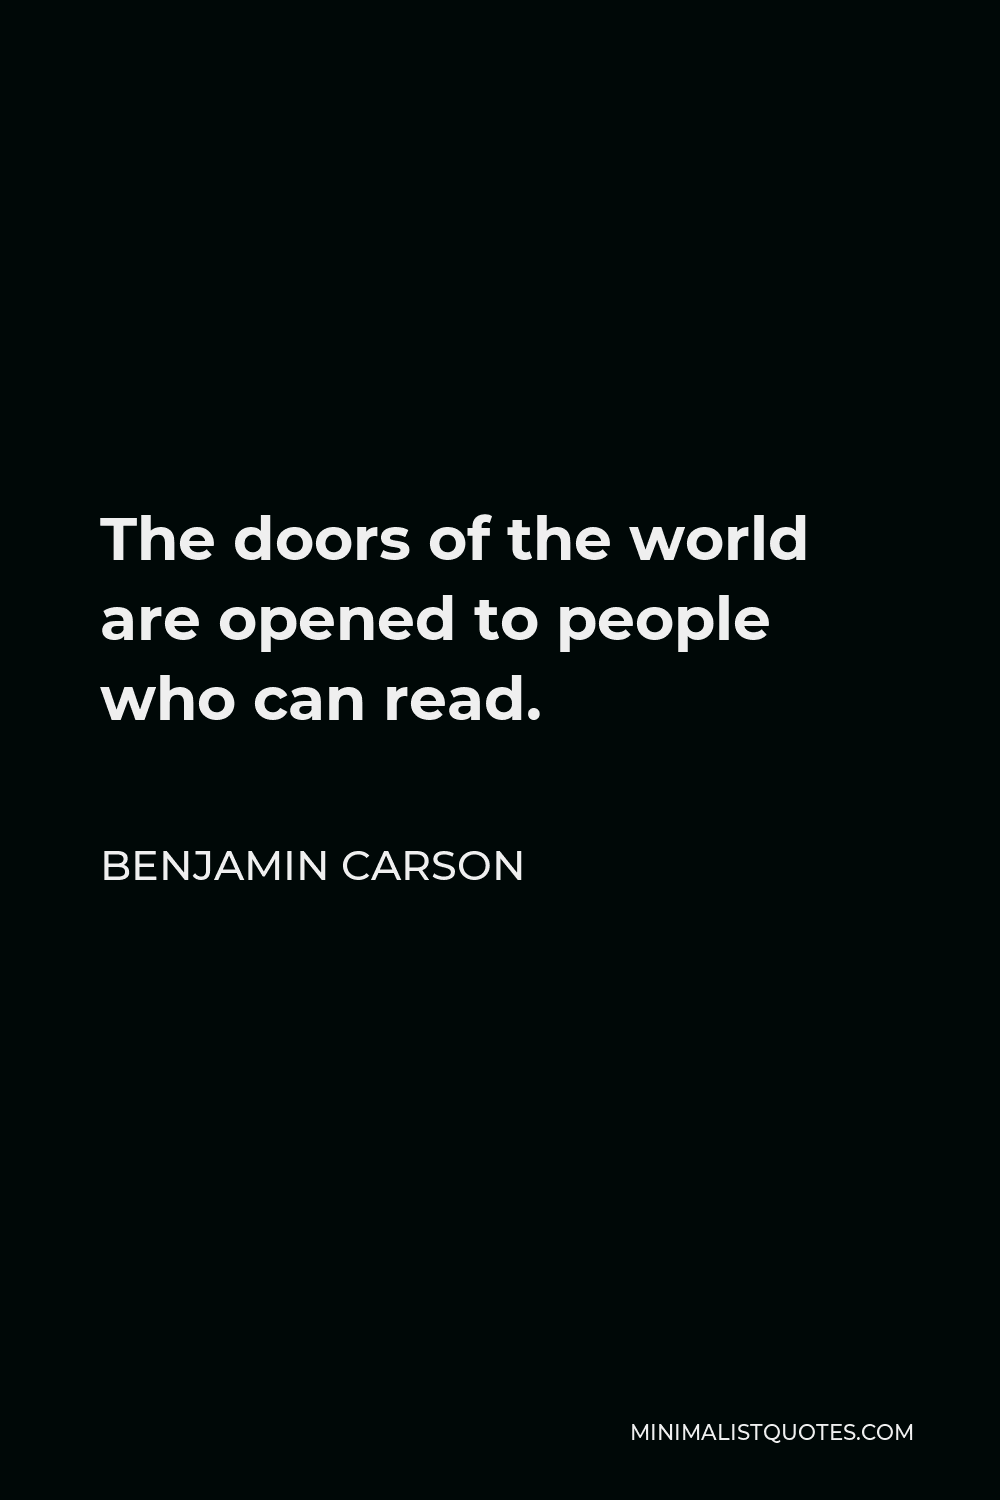 Benjamin Carson Quote - The doors of the world are opened to people who can read.